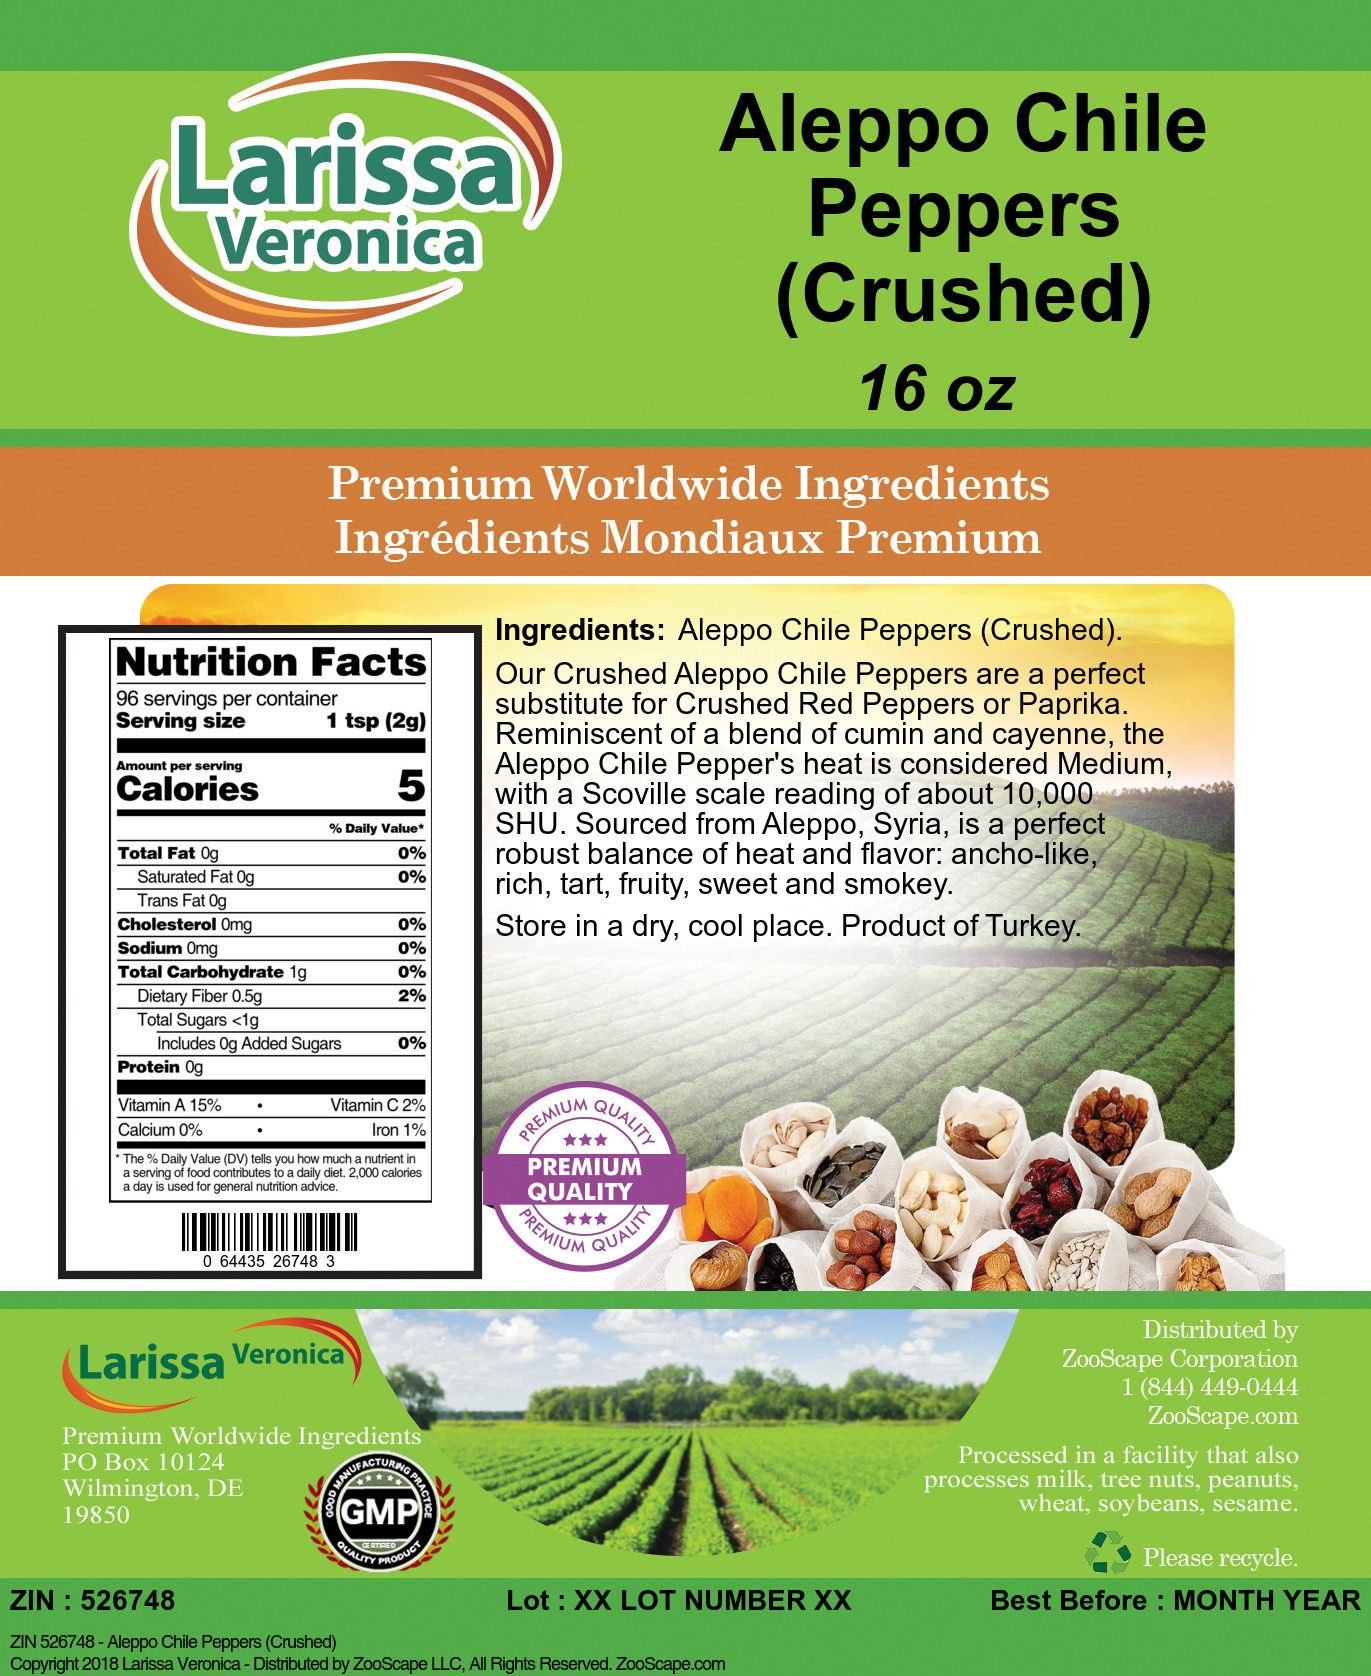 Aleppo Chile Peppers (Crushed) - Label